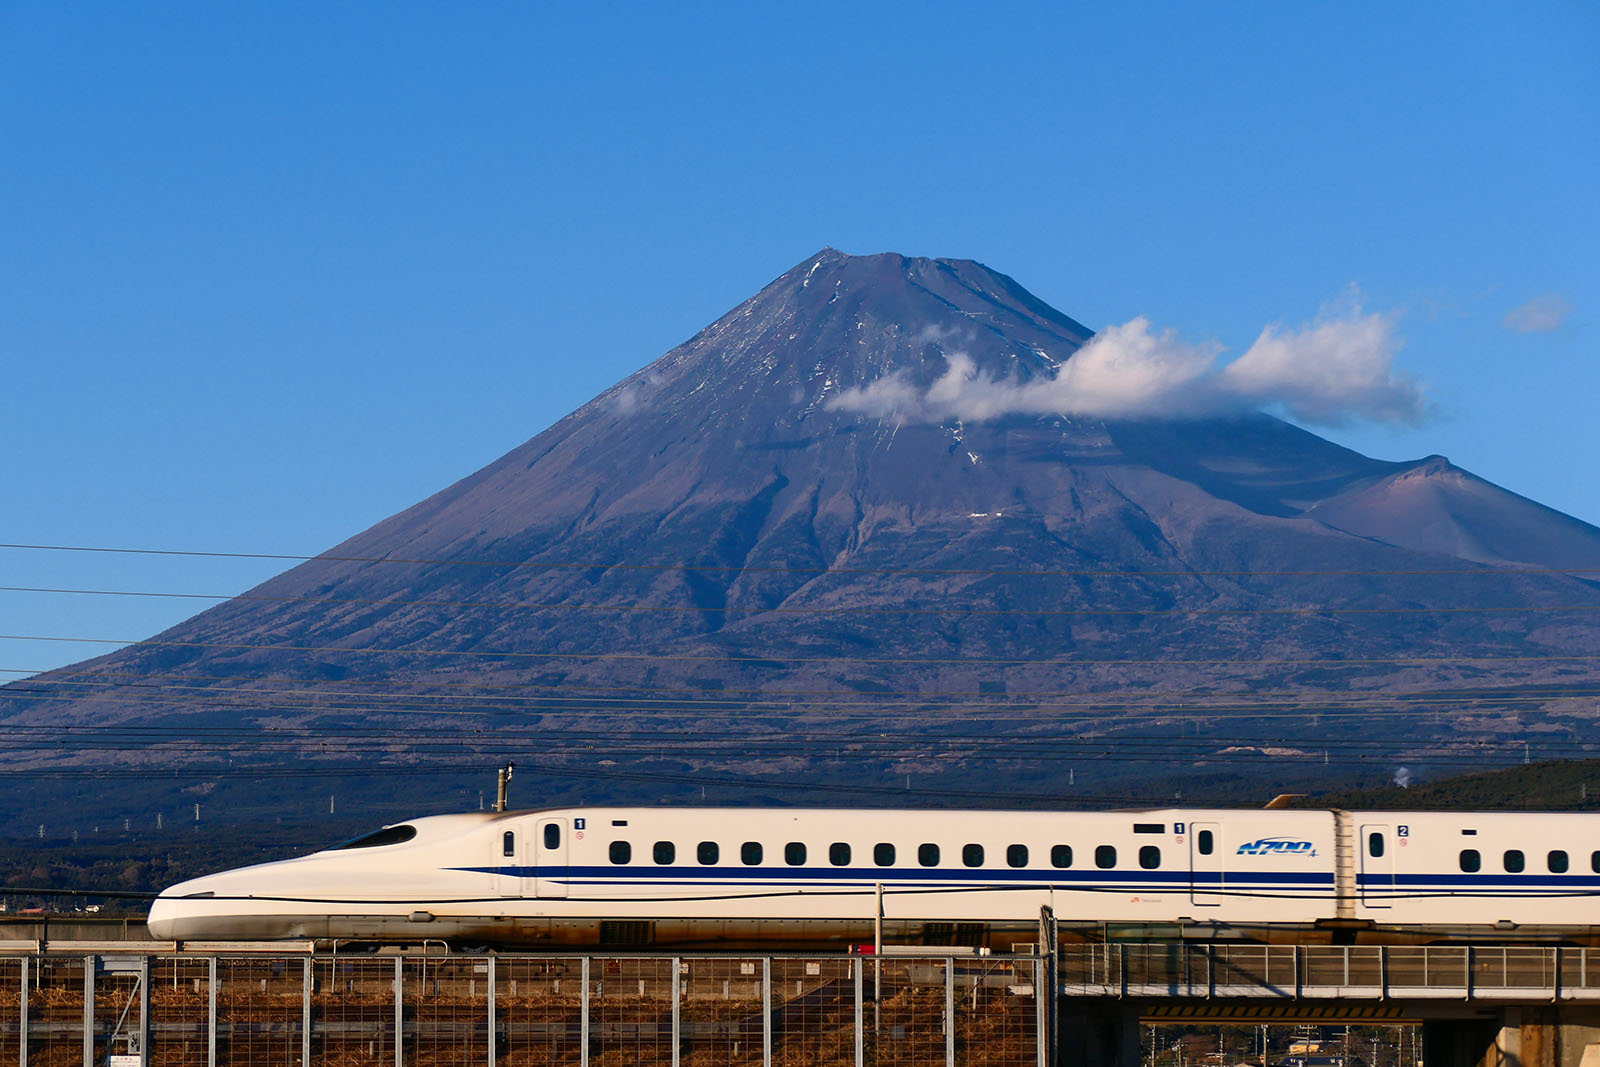 The Tokaido Shinkansen high-speed line in Japan, with Mount Fuji in the background.